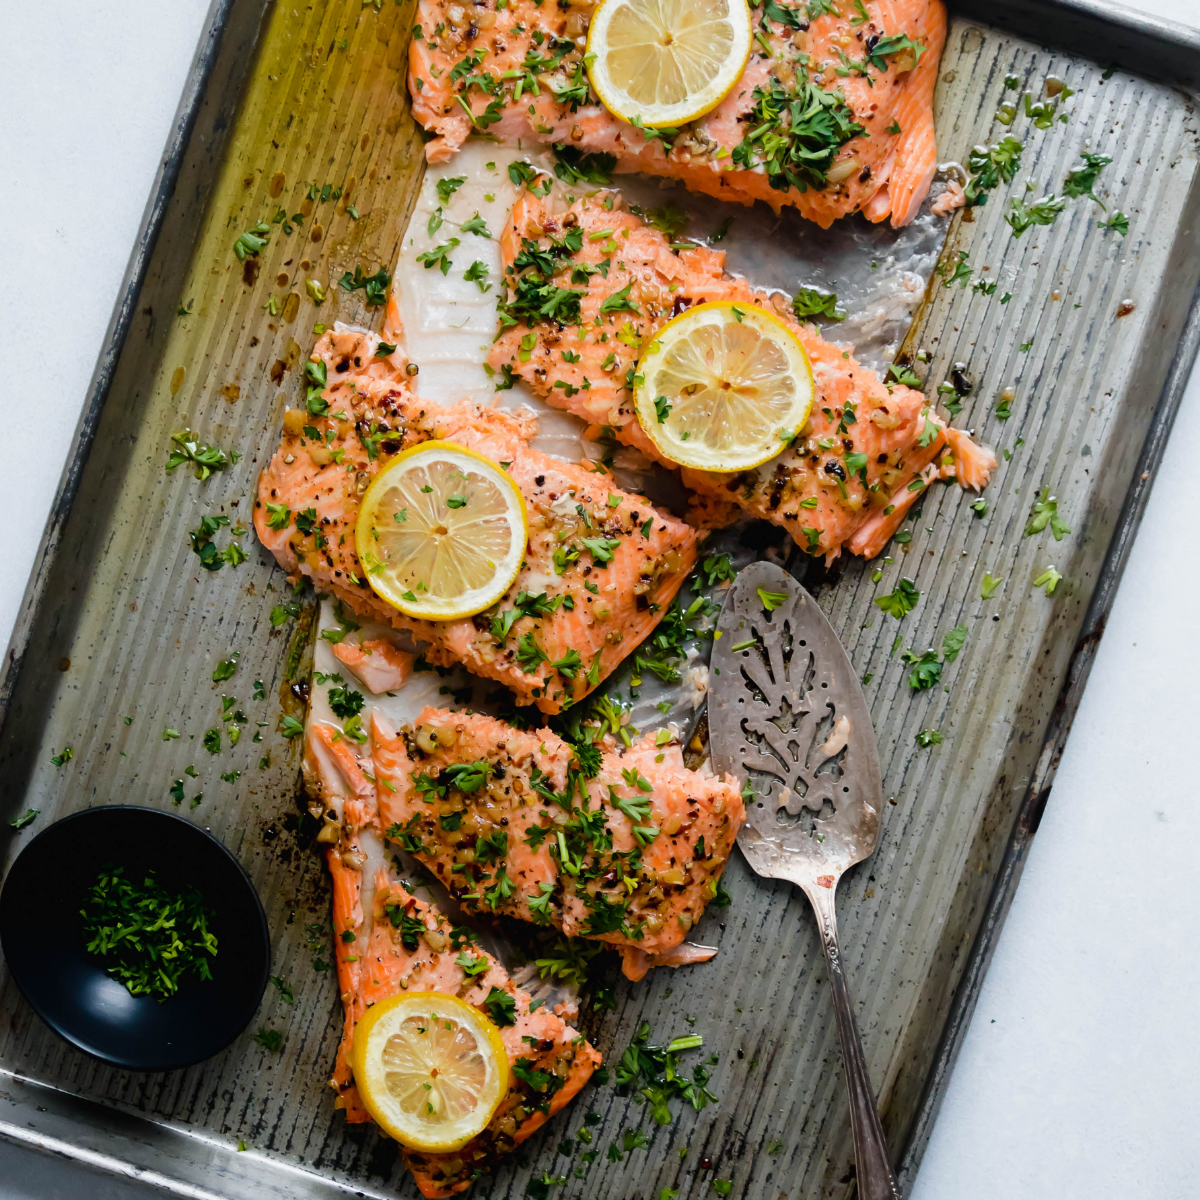 Baked steelhead fillet on a metal sheet pan, topped with fresh parsley and lemon slices and cut into portions.